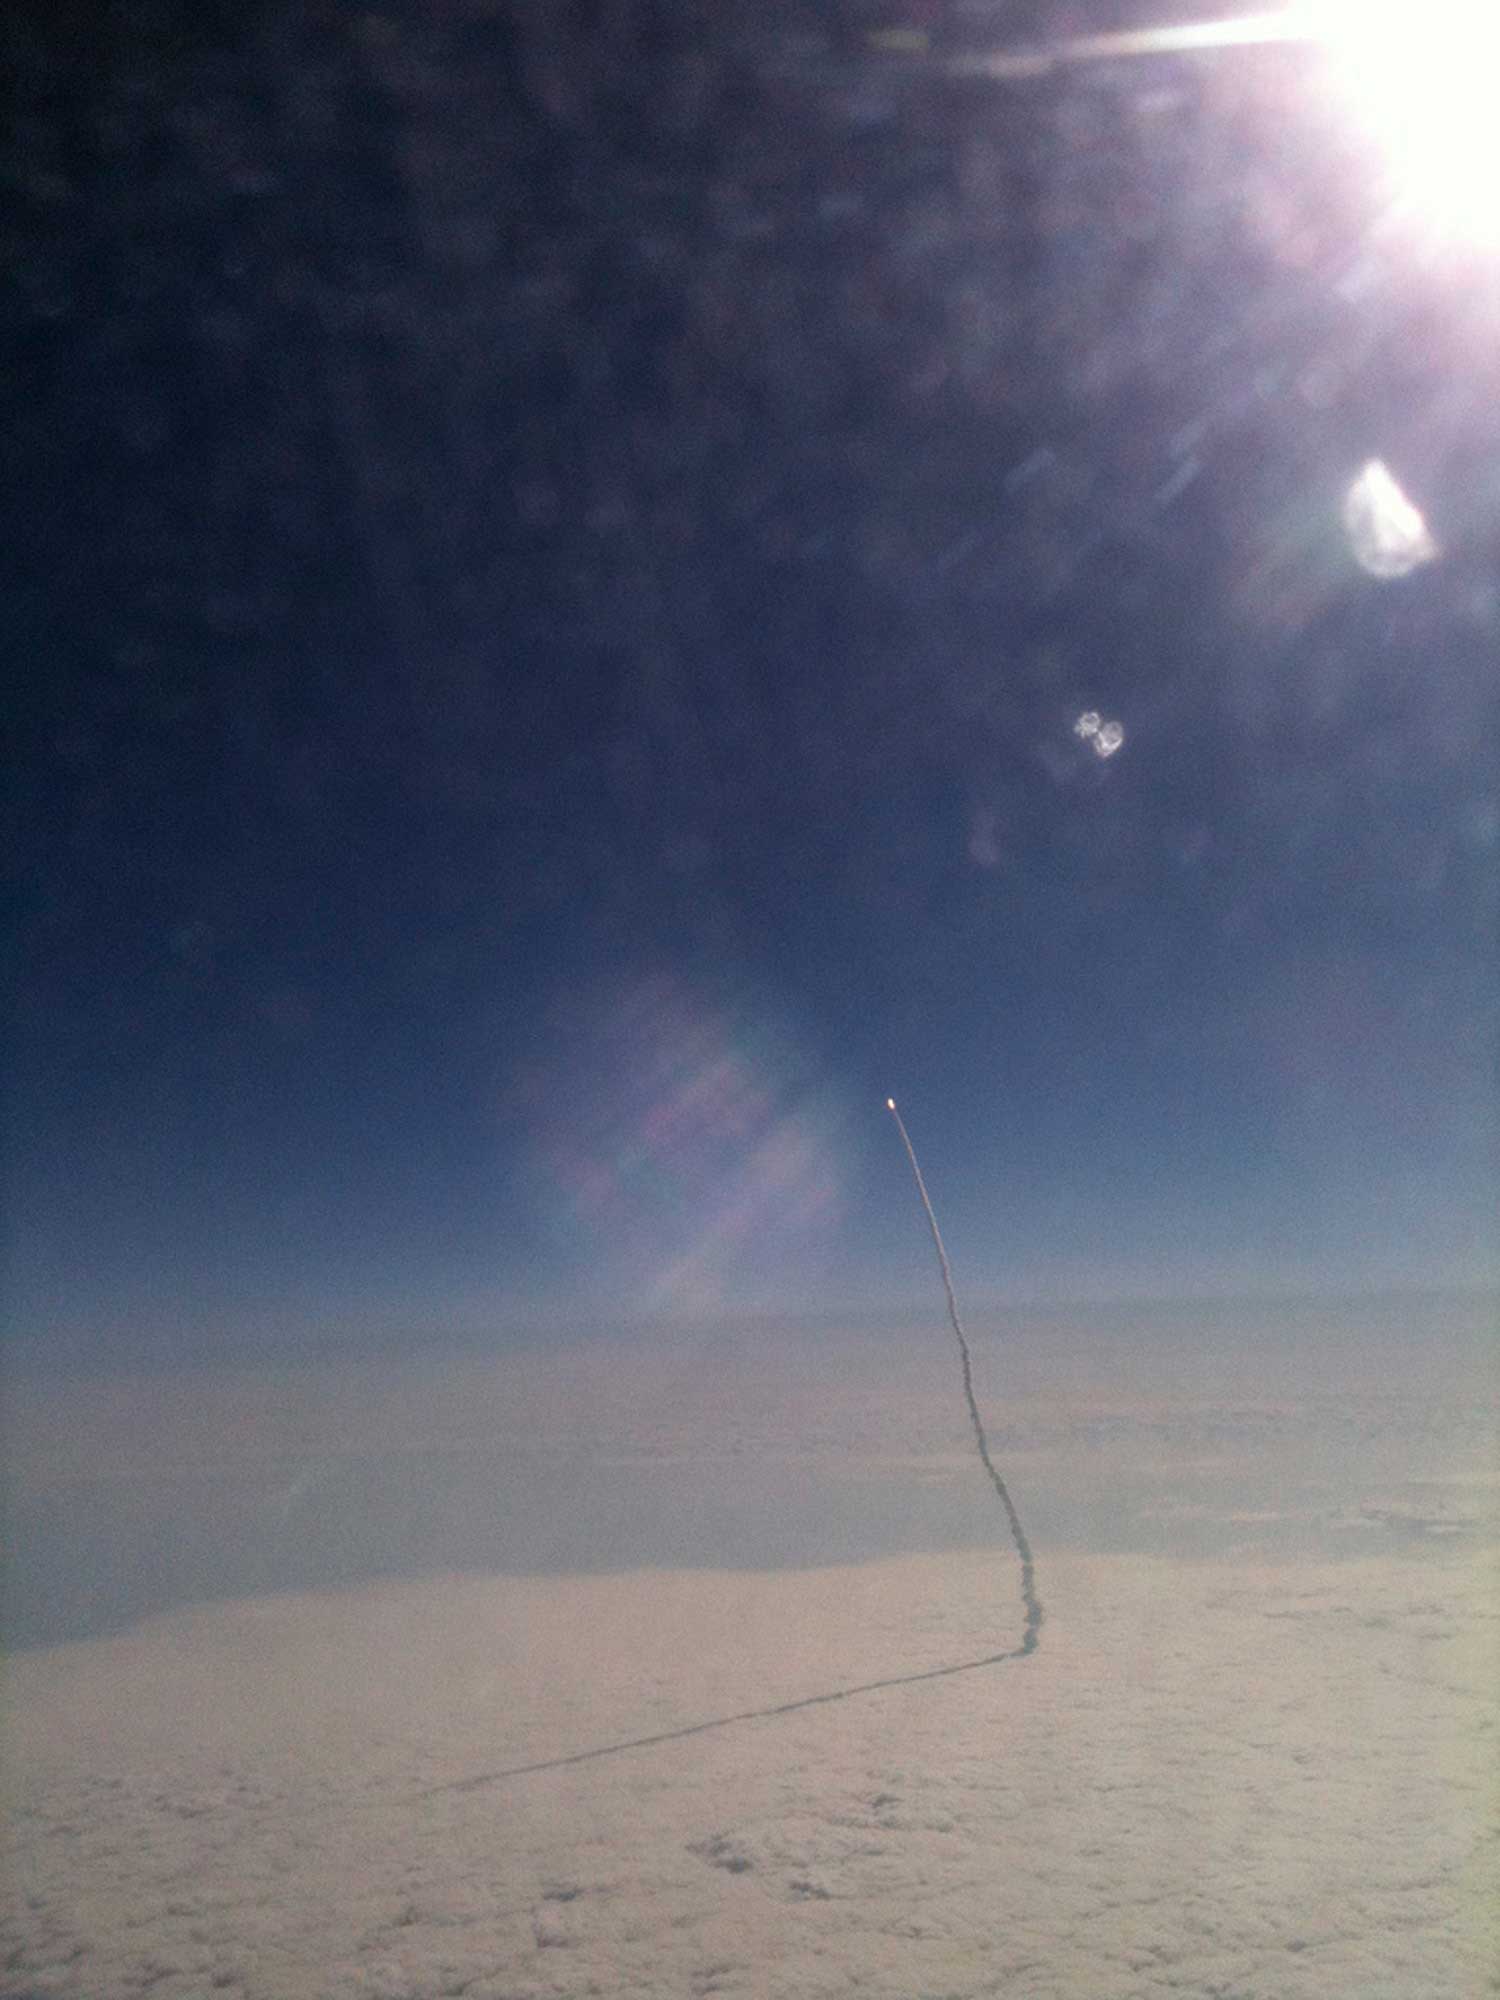 Stefanie Gordon. Shuttle launch. May 16, 2011
                              
                              The photo was an unexpected hit that I took from almost 35,000 ft. over Florida, flying from New York City to Palm Beach with—of all things my—iPhone 3GS, and tweeted it out upon landing. I didn't realize the impact of the photo or the rounds it was making in social media until a few hours later when I looked at my Twitter mentions and all the personal messages I was receiving on Facebook. Next thing I knew, I was being interviewed by media outlets from all over the world, and my photo was on almost every evening news program. I am still in search for that perfect job that many thought would be offered to me after the photo caught fire.